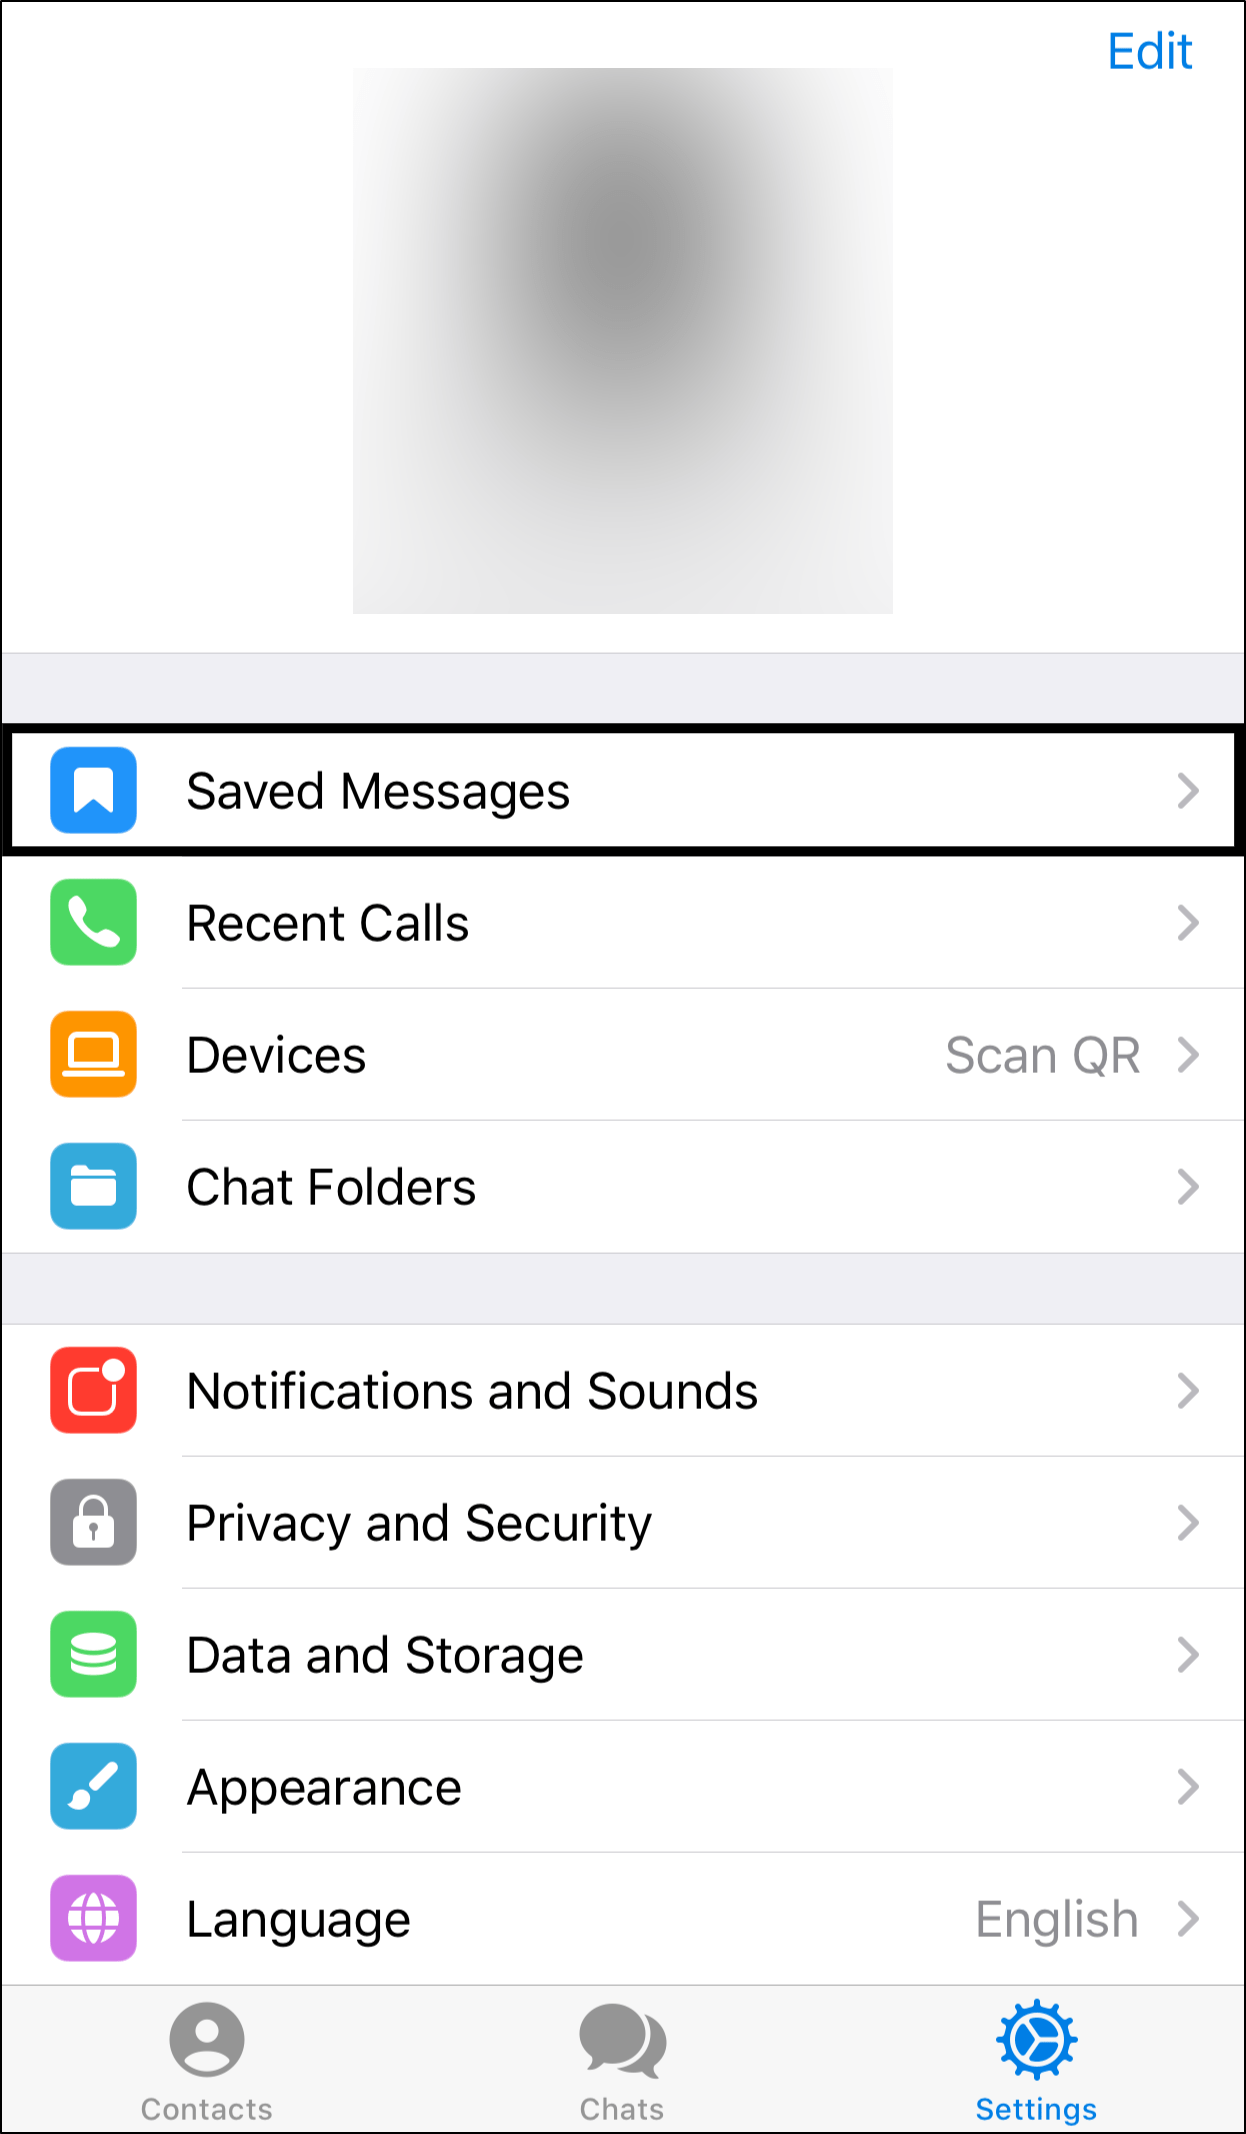 access saved messages to send messages to yourself on telegram on iPhone and iPad